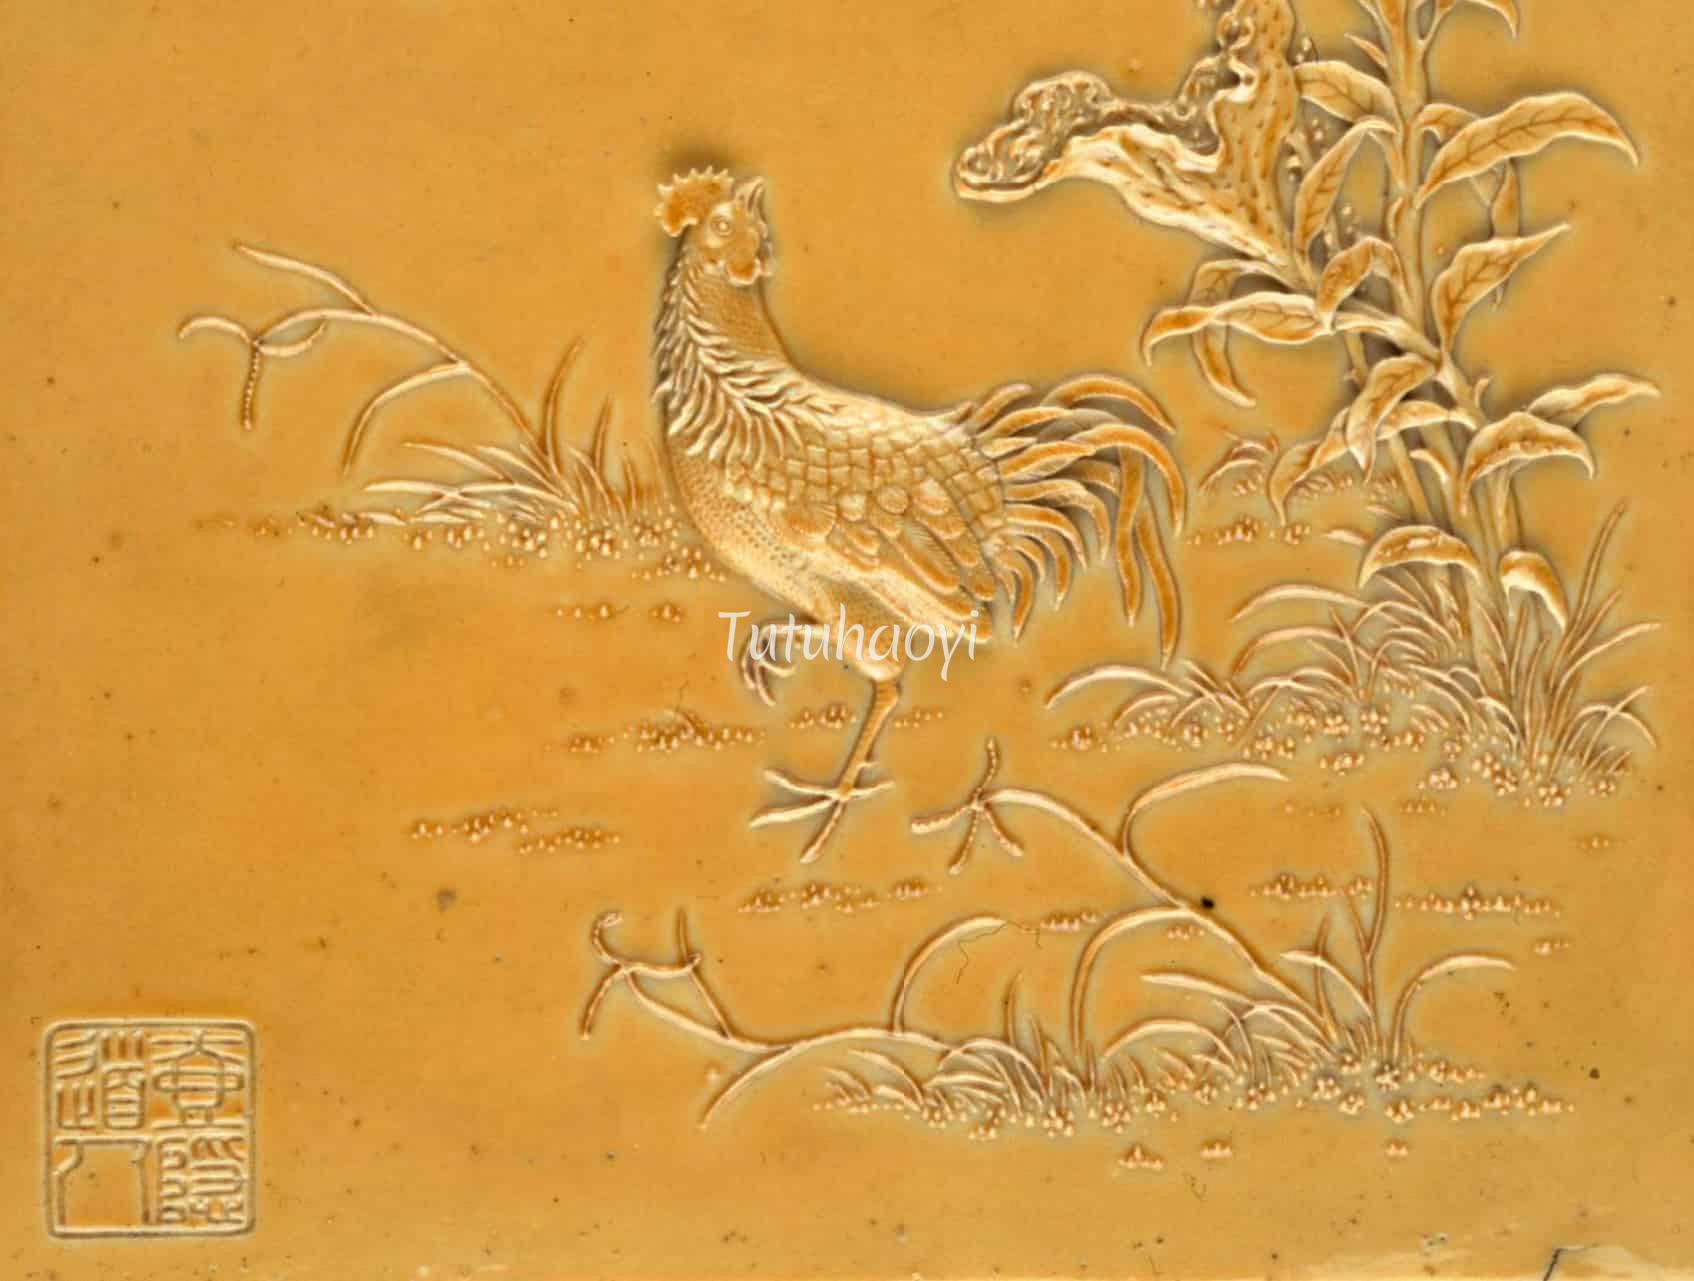 porcelain table screen depicting a rooster and cockscomb